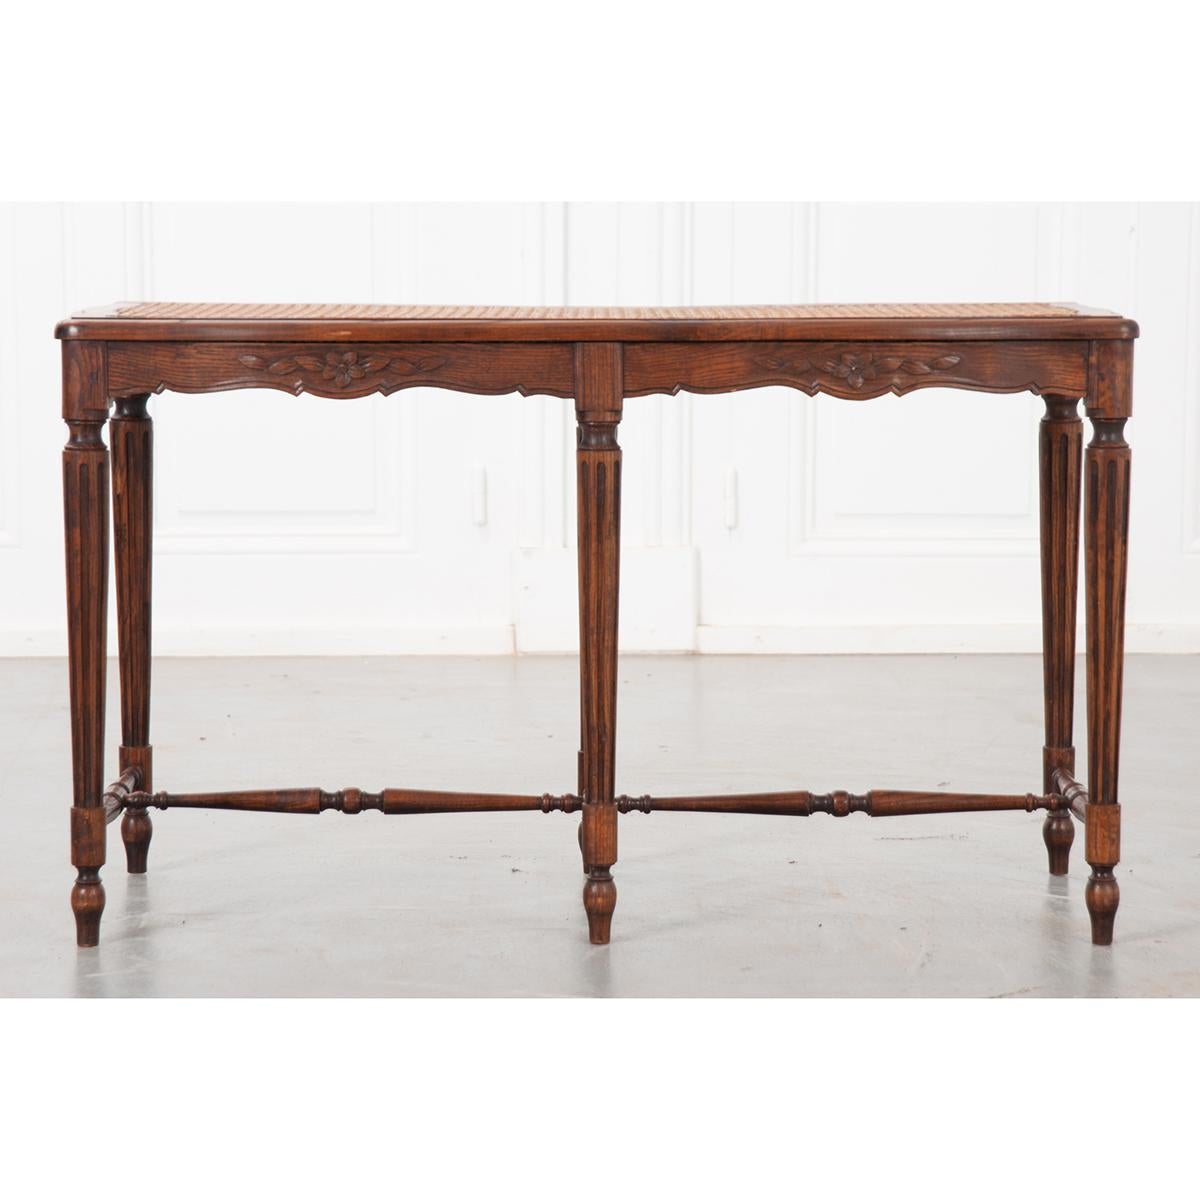 French 19th Century Oak Louis XVI-Style Bench with Cane Seat For Sale 7